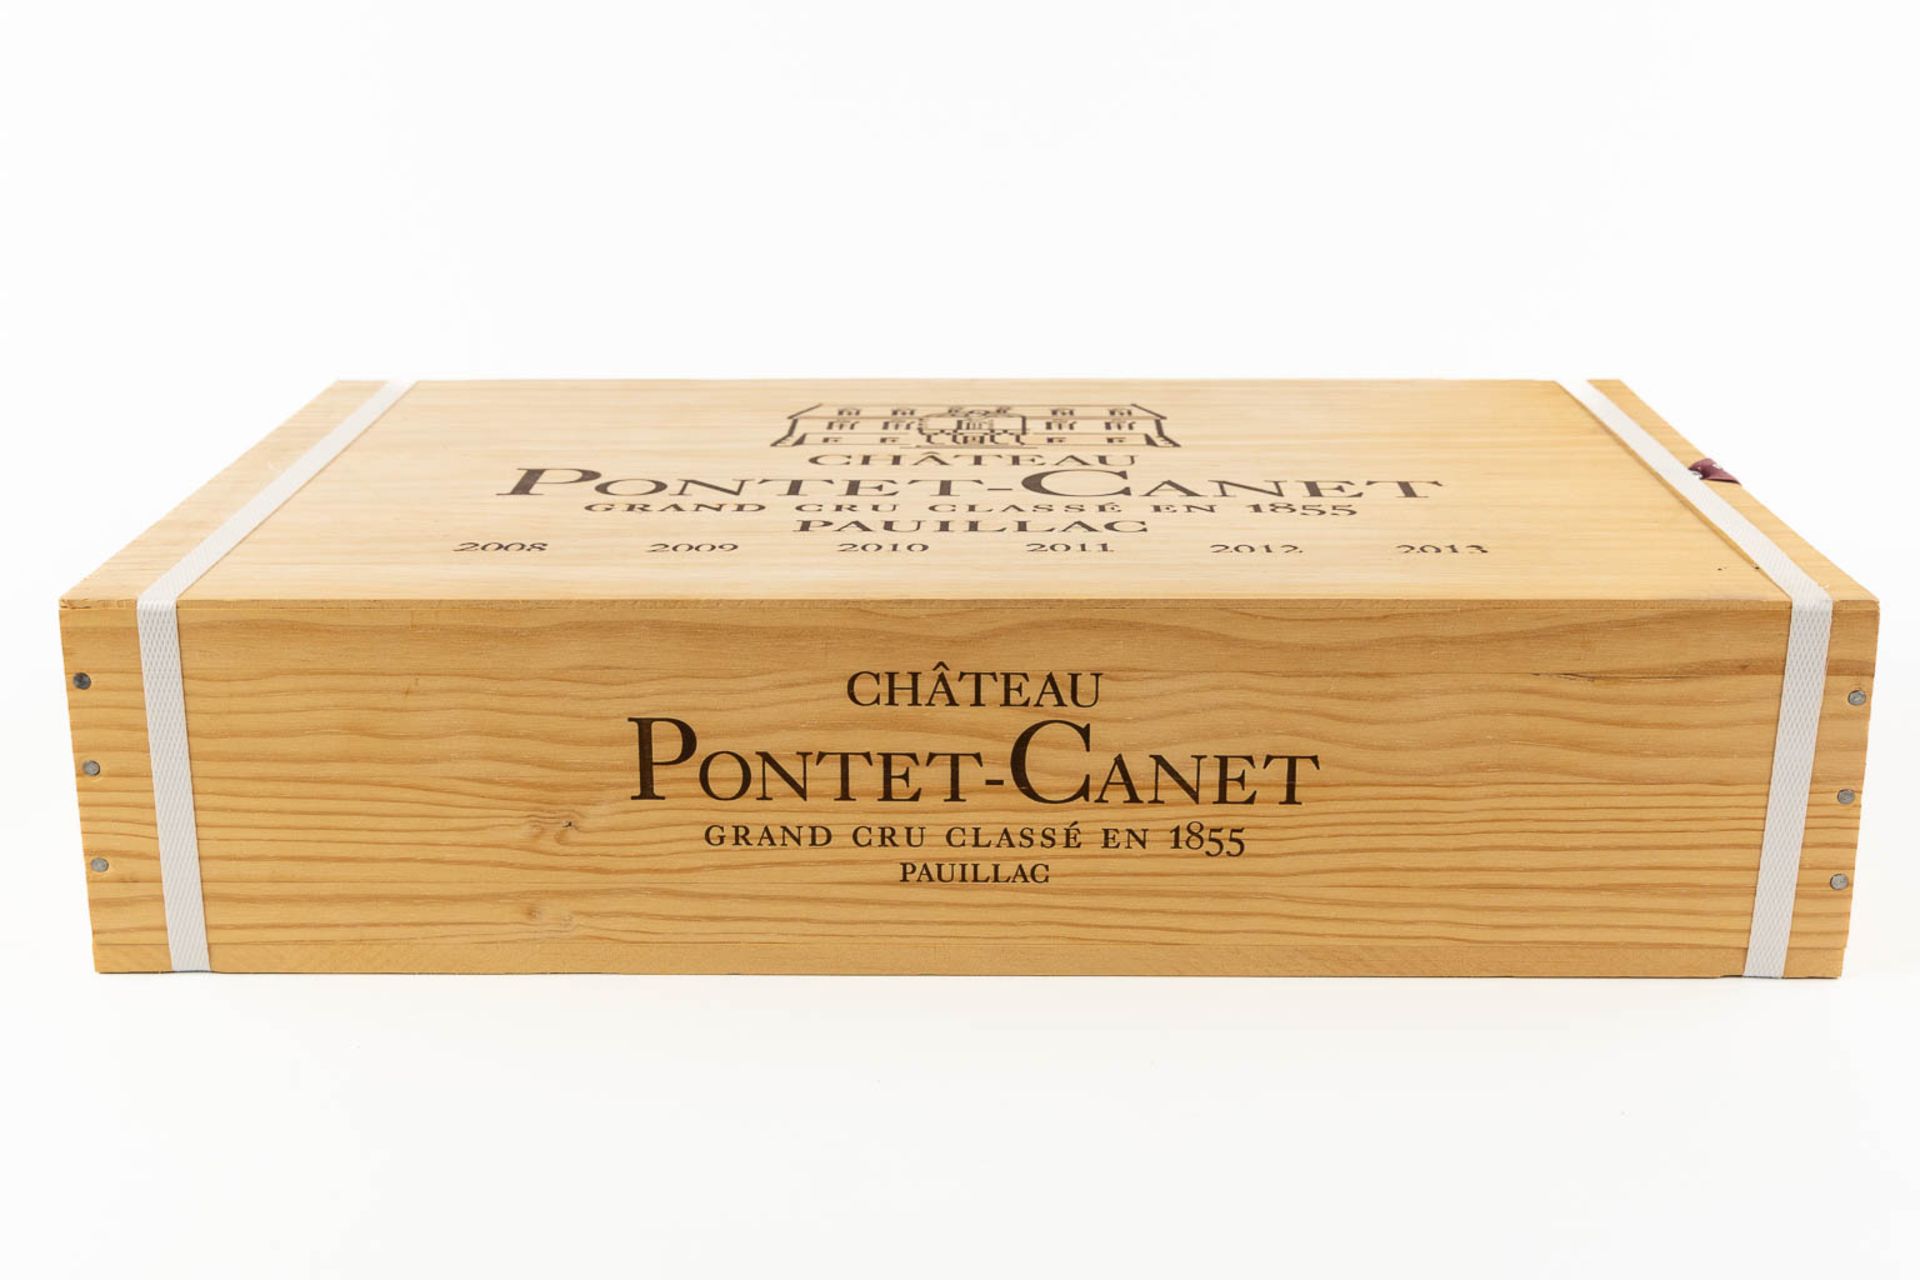 2008-2013 Pontet Canet Collection Case (owc) - Image 2 of 4